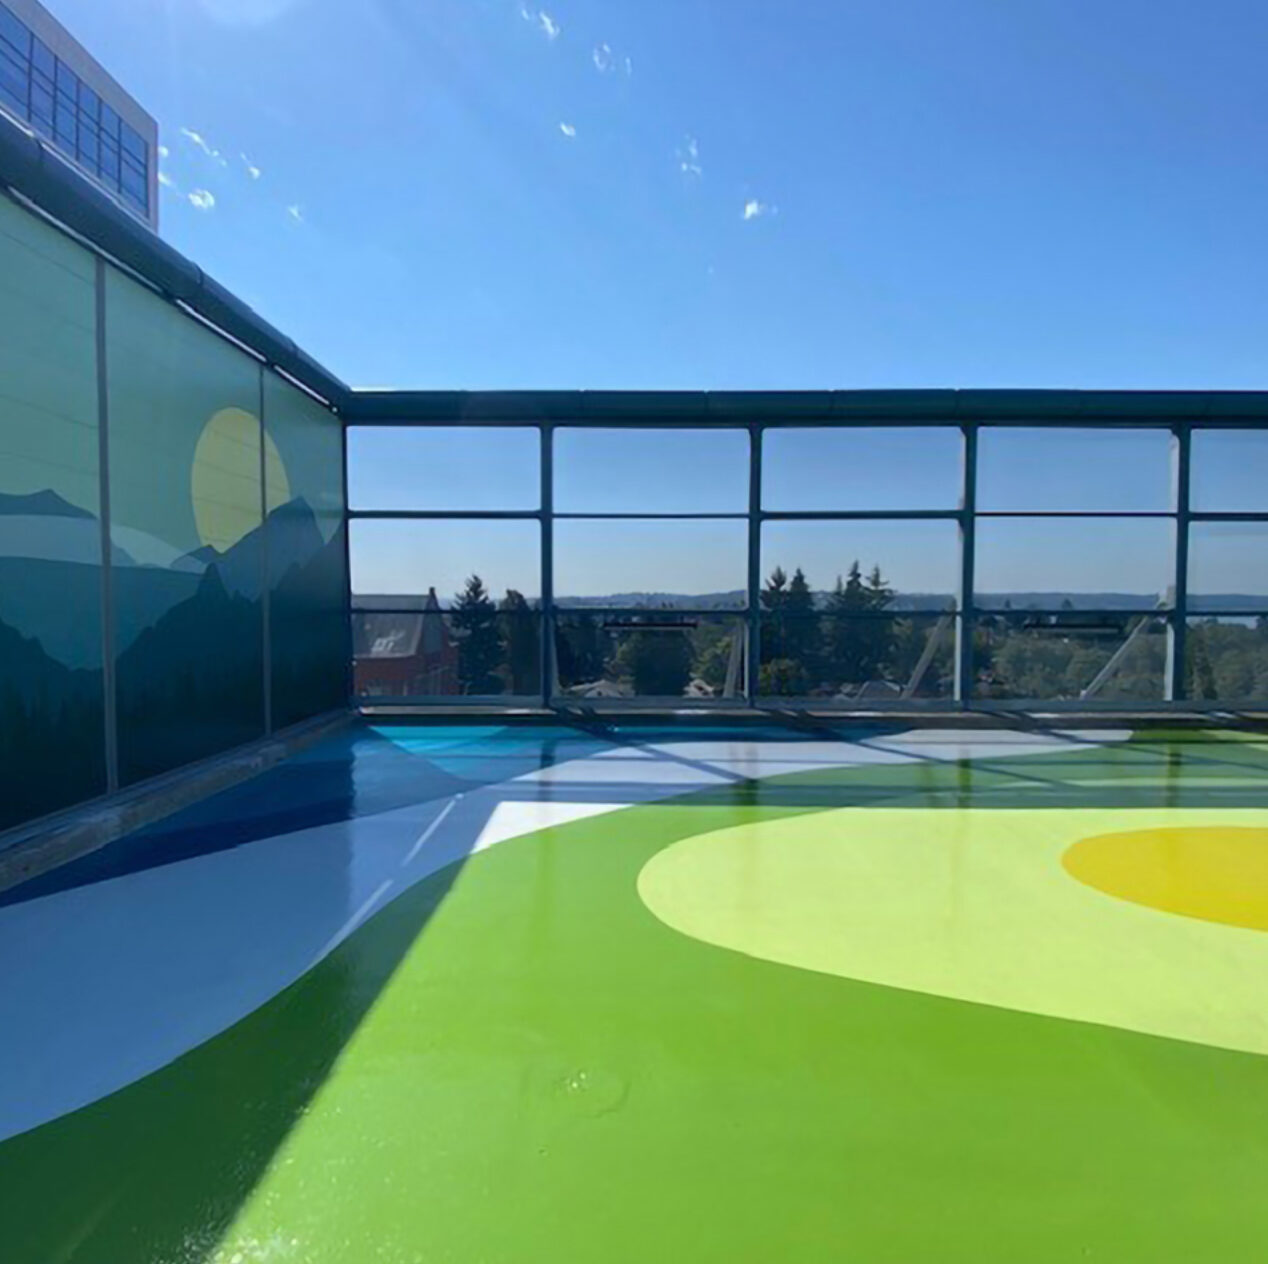 Rooftop helipad converted to outdoor space for patients, Providence Regional Medical Center, Everett, 4th Floor Behavioral Health Unit.